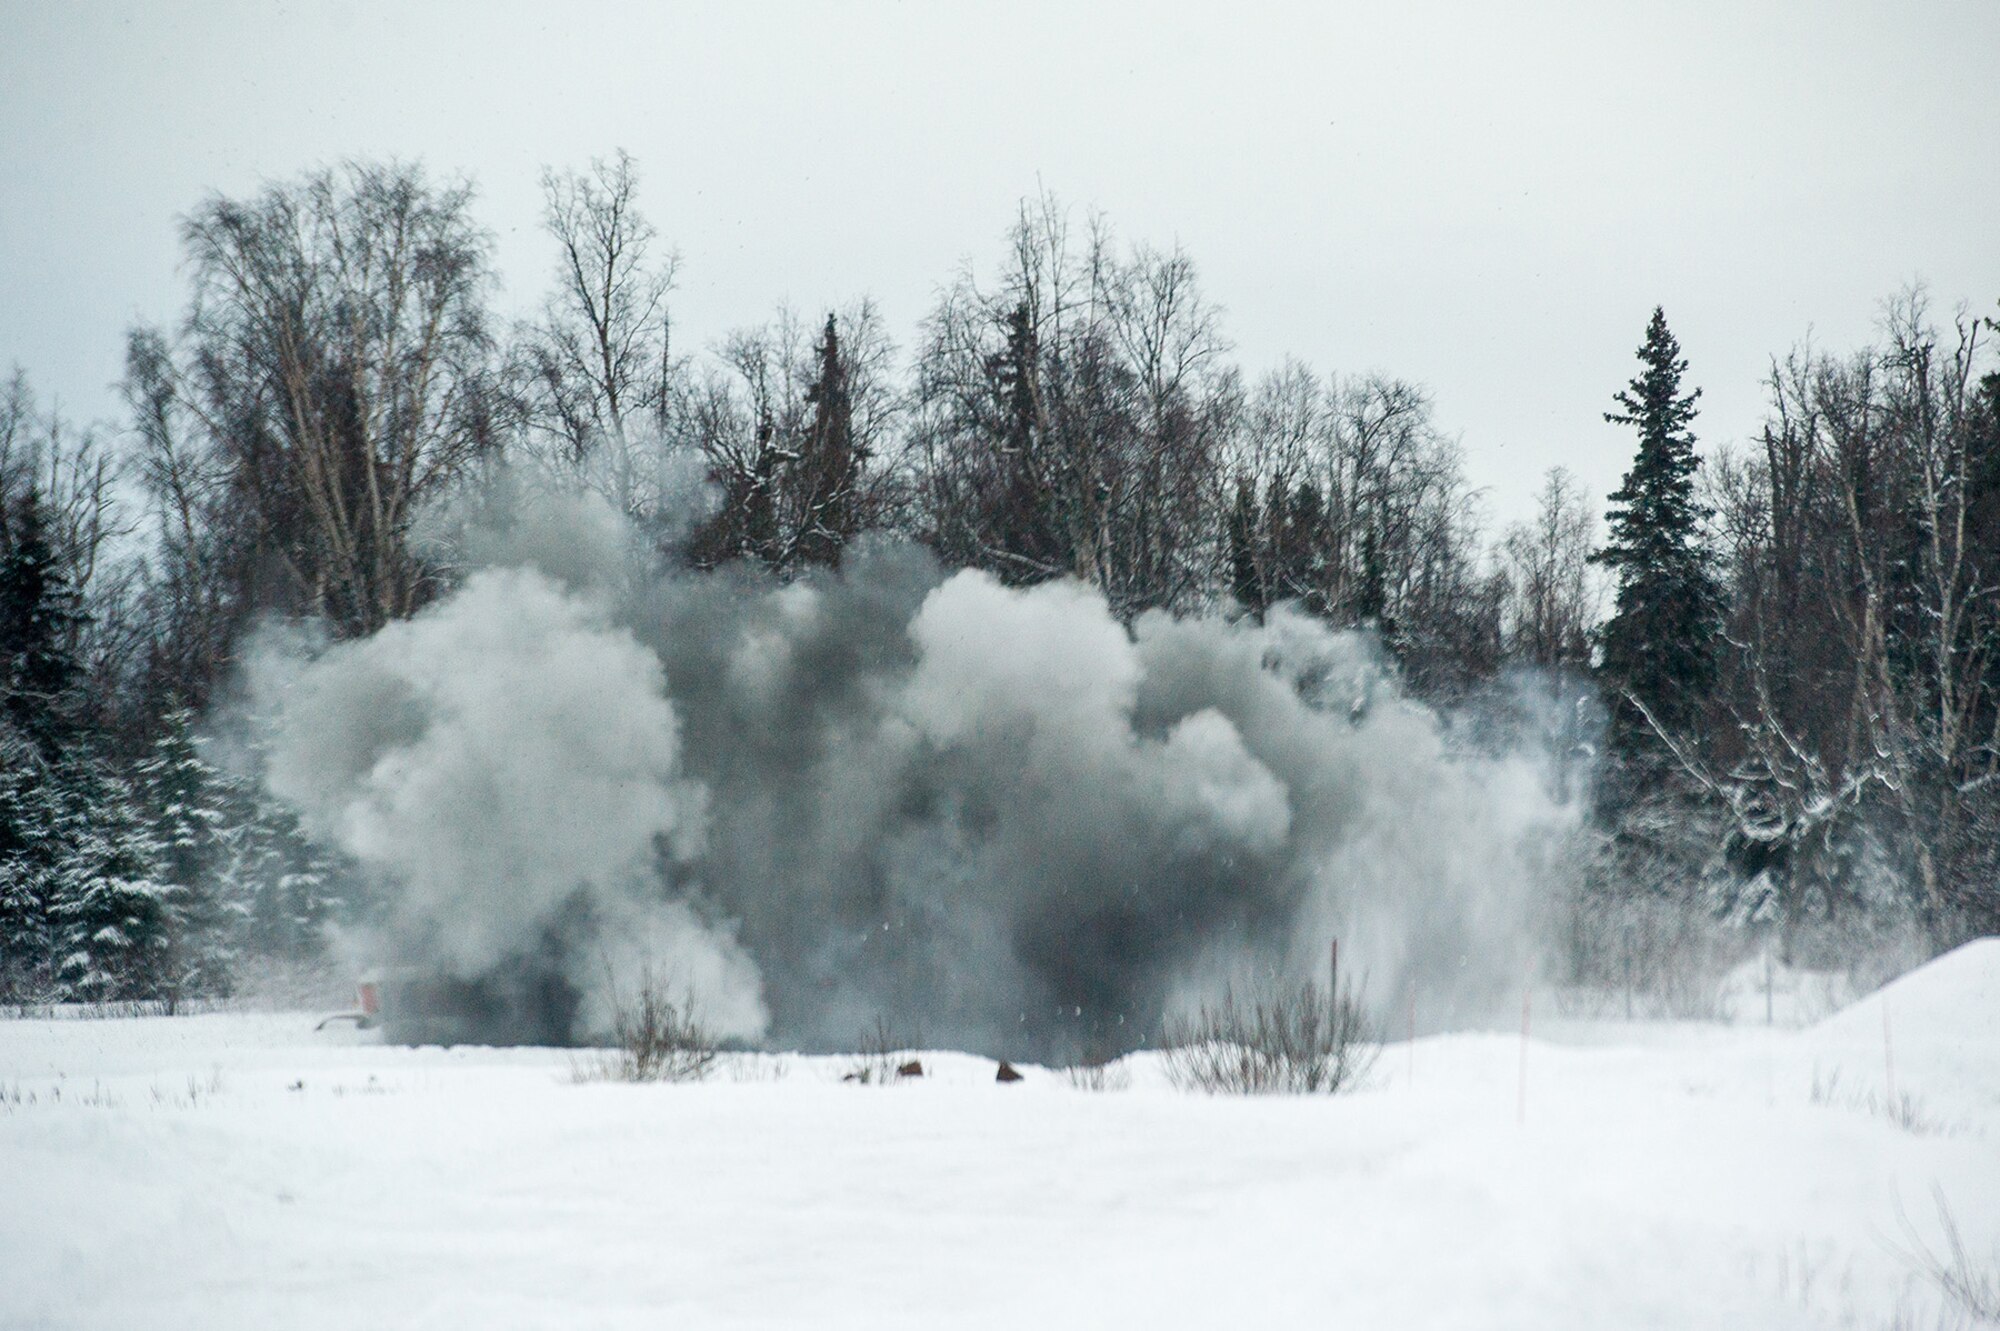 Explosive charges detonate throwing snow and debris into the air as Airmen assigned to the 673d Civil Engineer Squadron, Explosives Ordinance Disposal Flight, conduct a live-fire demolitions exercise in Mission Oriented Protective Posture 4 on Joint Base Elmendorf-Richardson, Alaska, Feb.14, 2018.  The Airmen were conducting EOD training in a simulated chemical weapons contaminated environment.